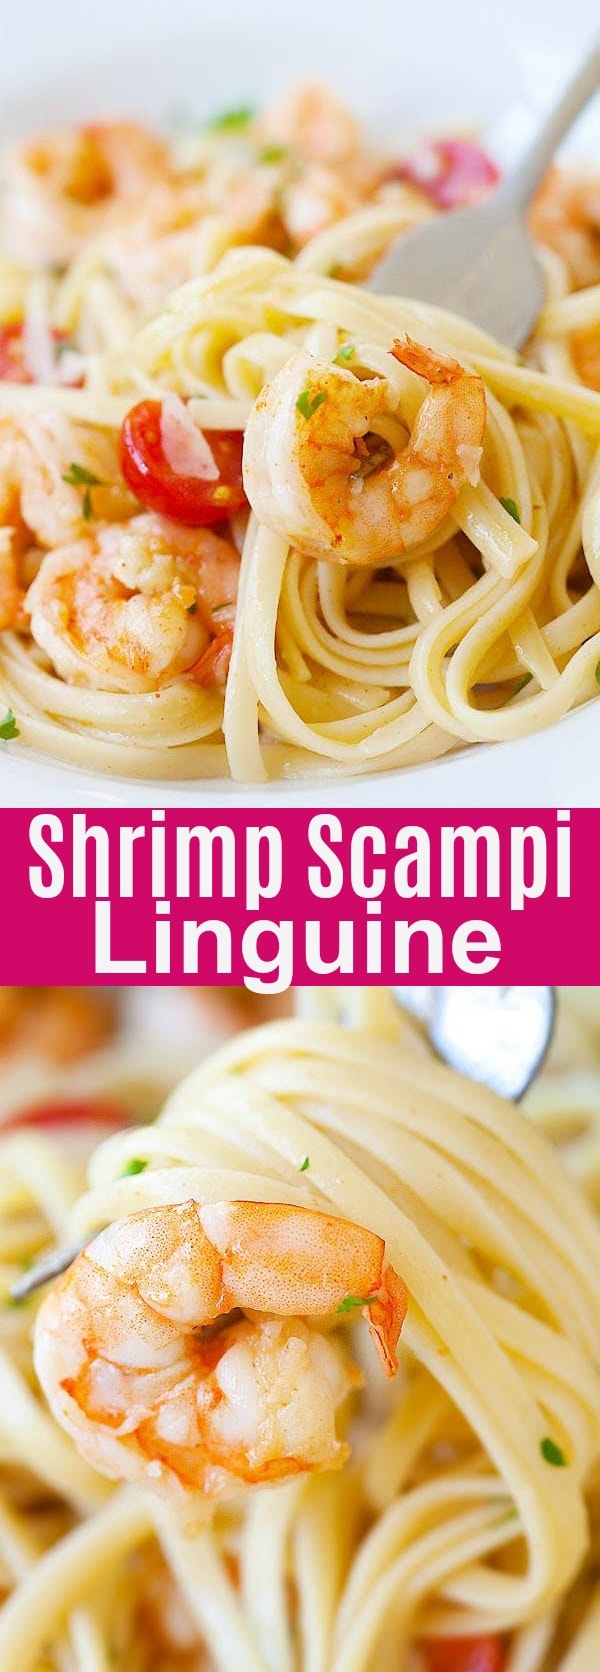 Garlicky buttery shrimp scampi linguine. Quick & easy recipe that you can make in one pot for the family. Super yummy and you'll want it every day | rasamalaysia.com